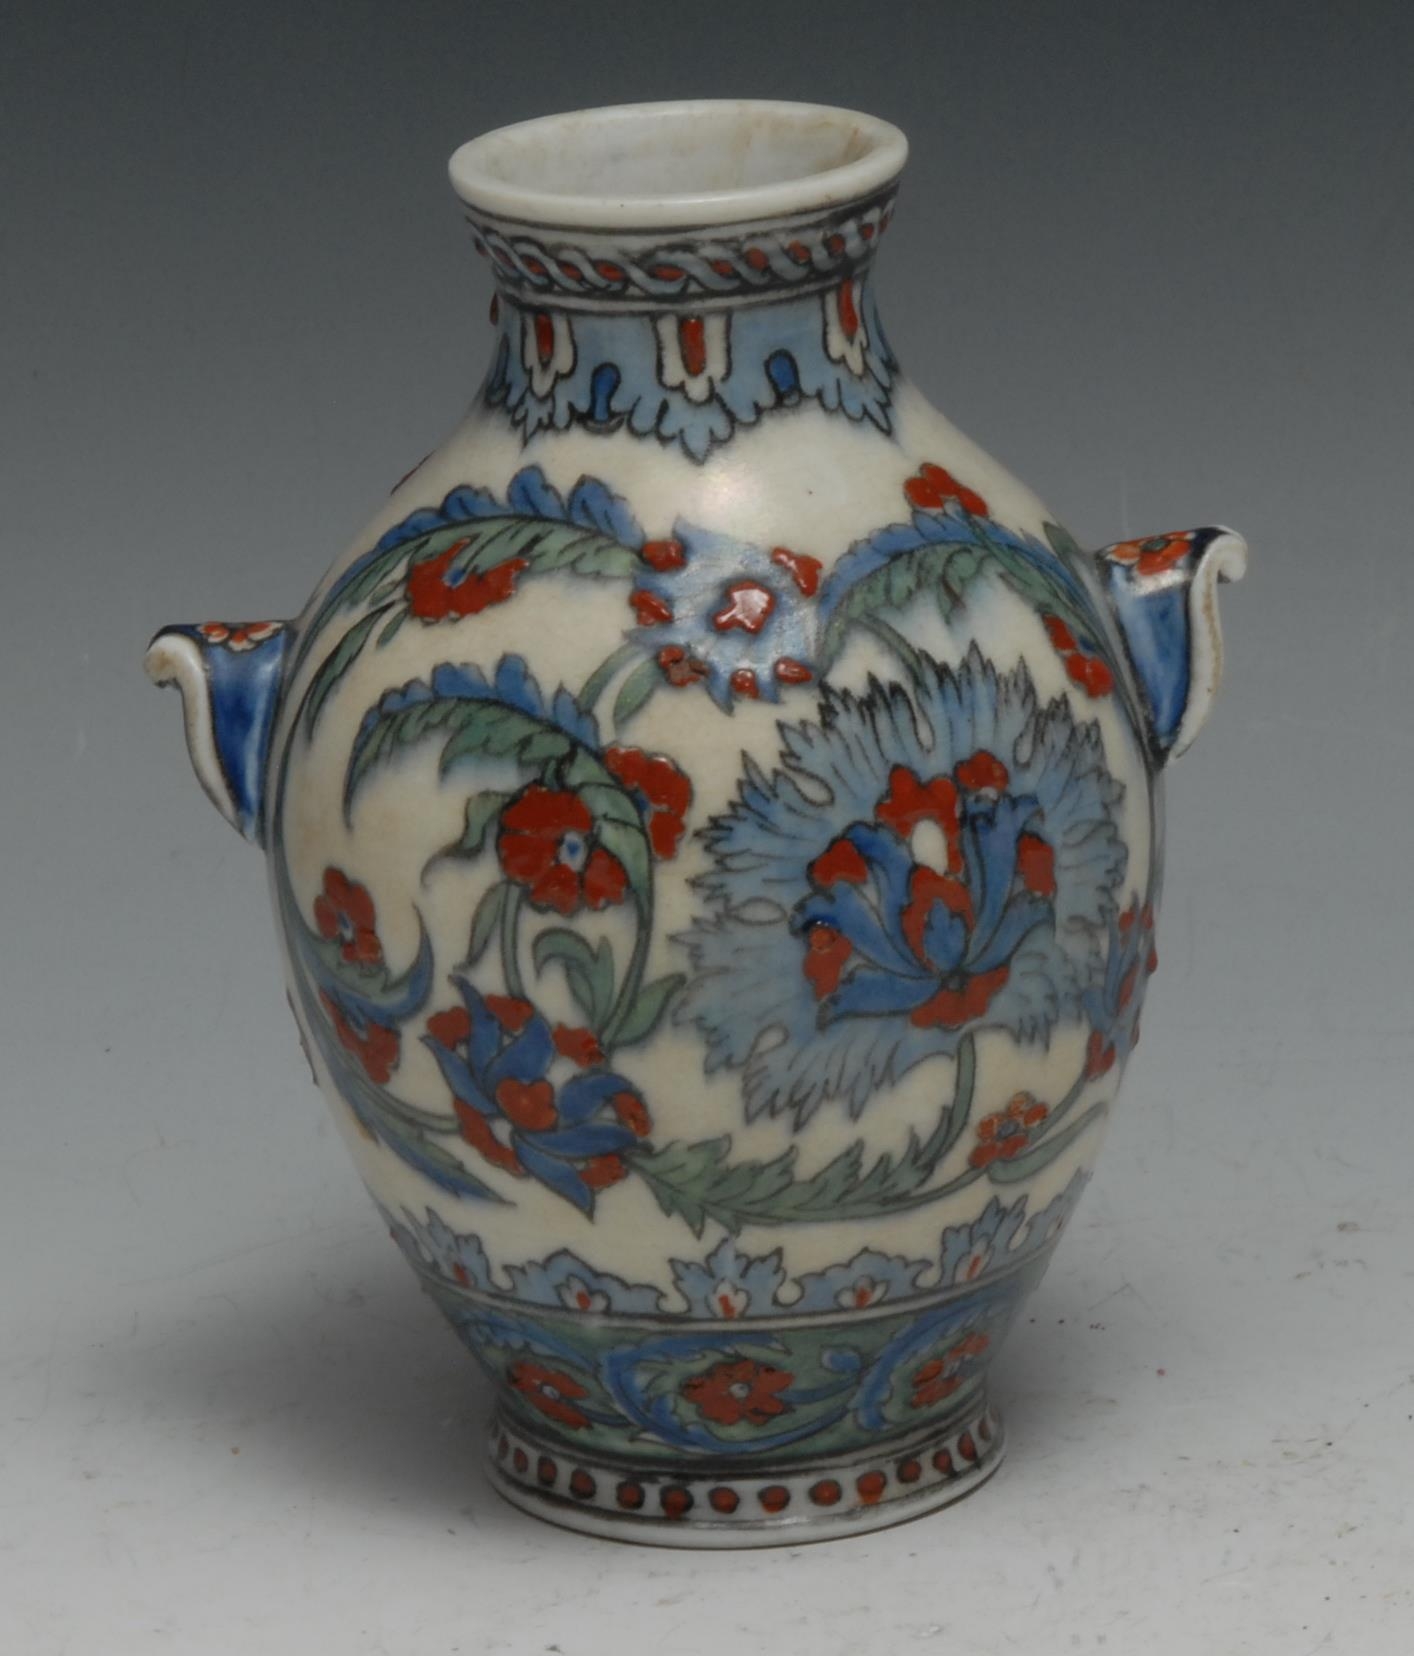 A Middle Eastern ovoid vase, painted in the Iznik palette of blue, green and sealing wax red with